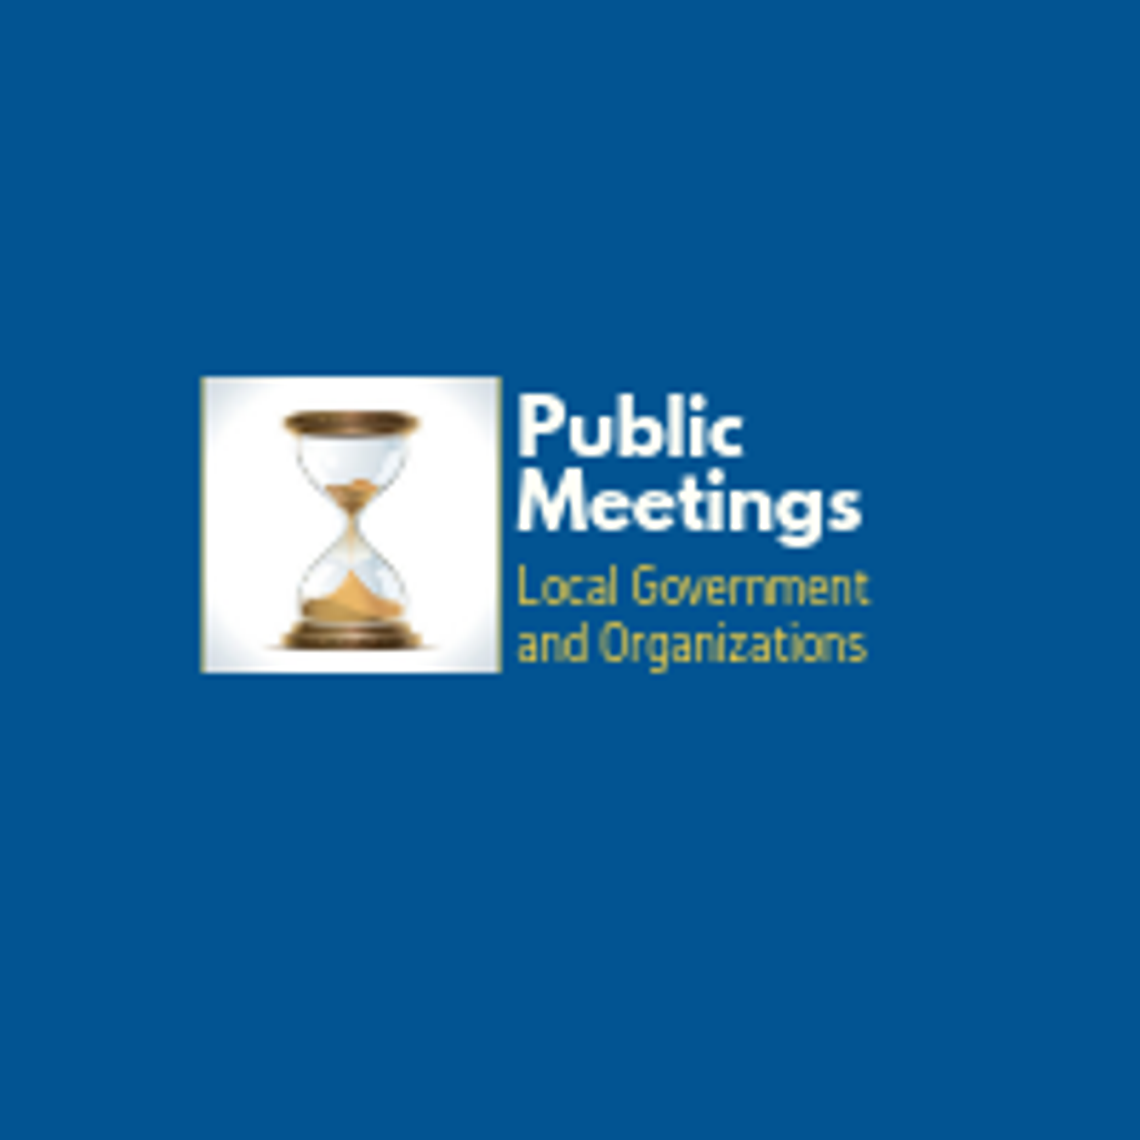 Public Meetings this week March 2nd